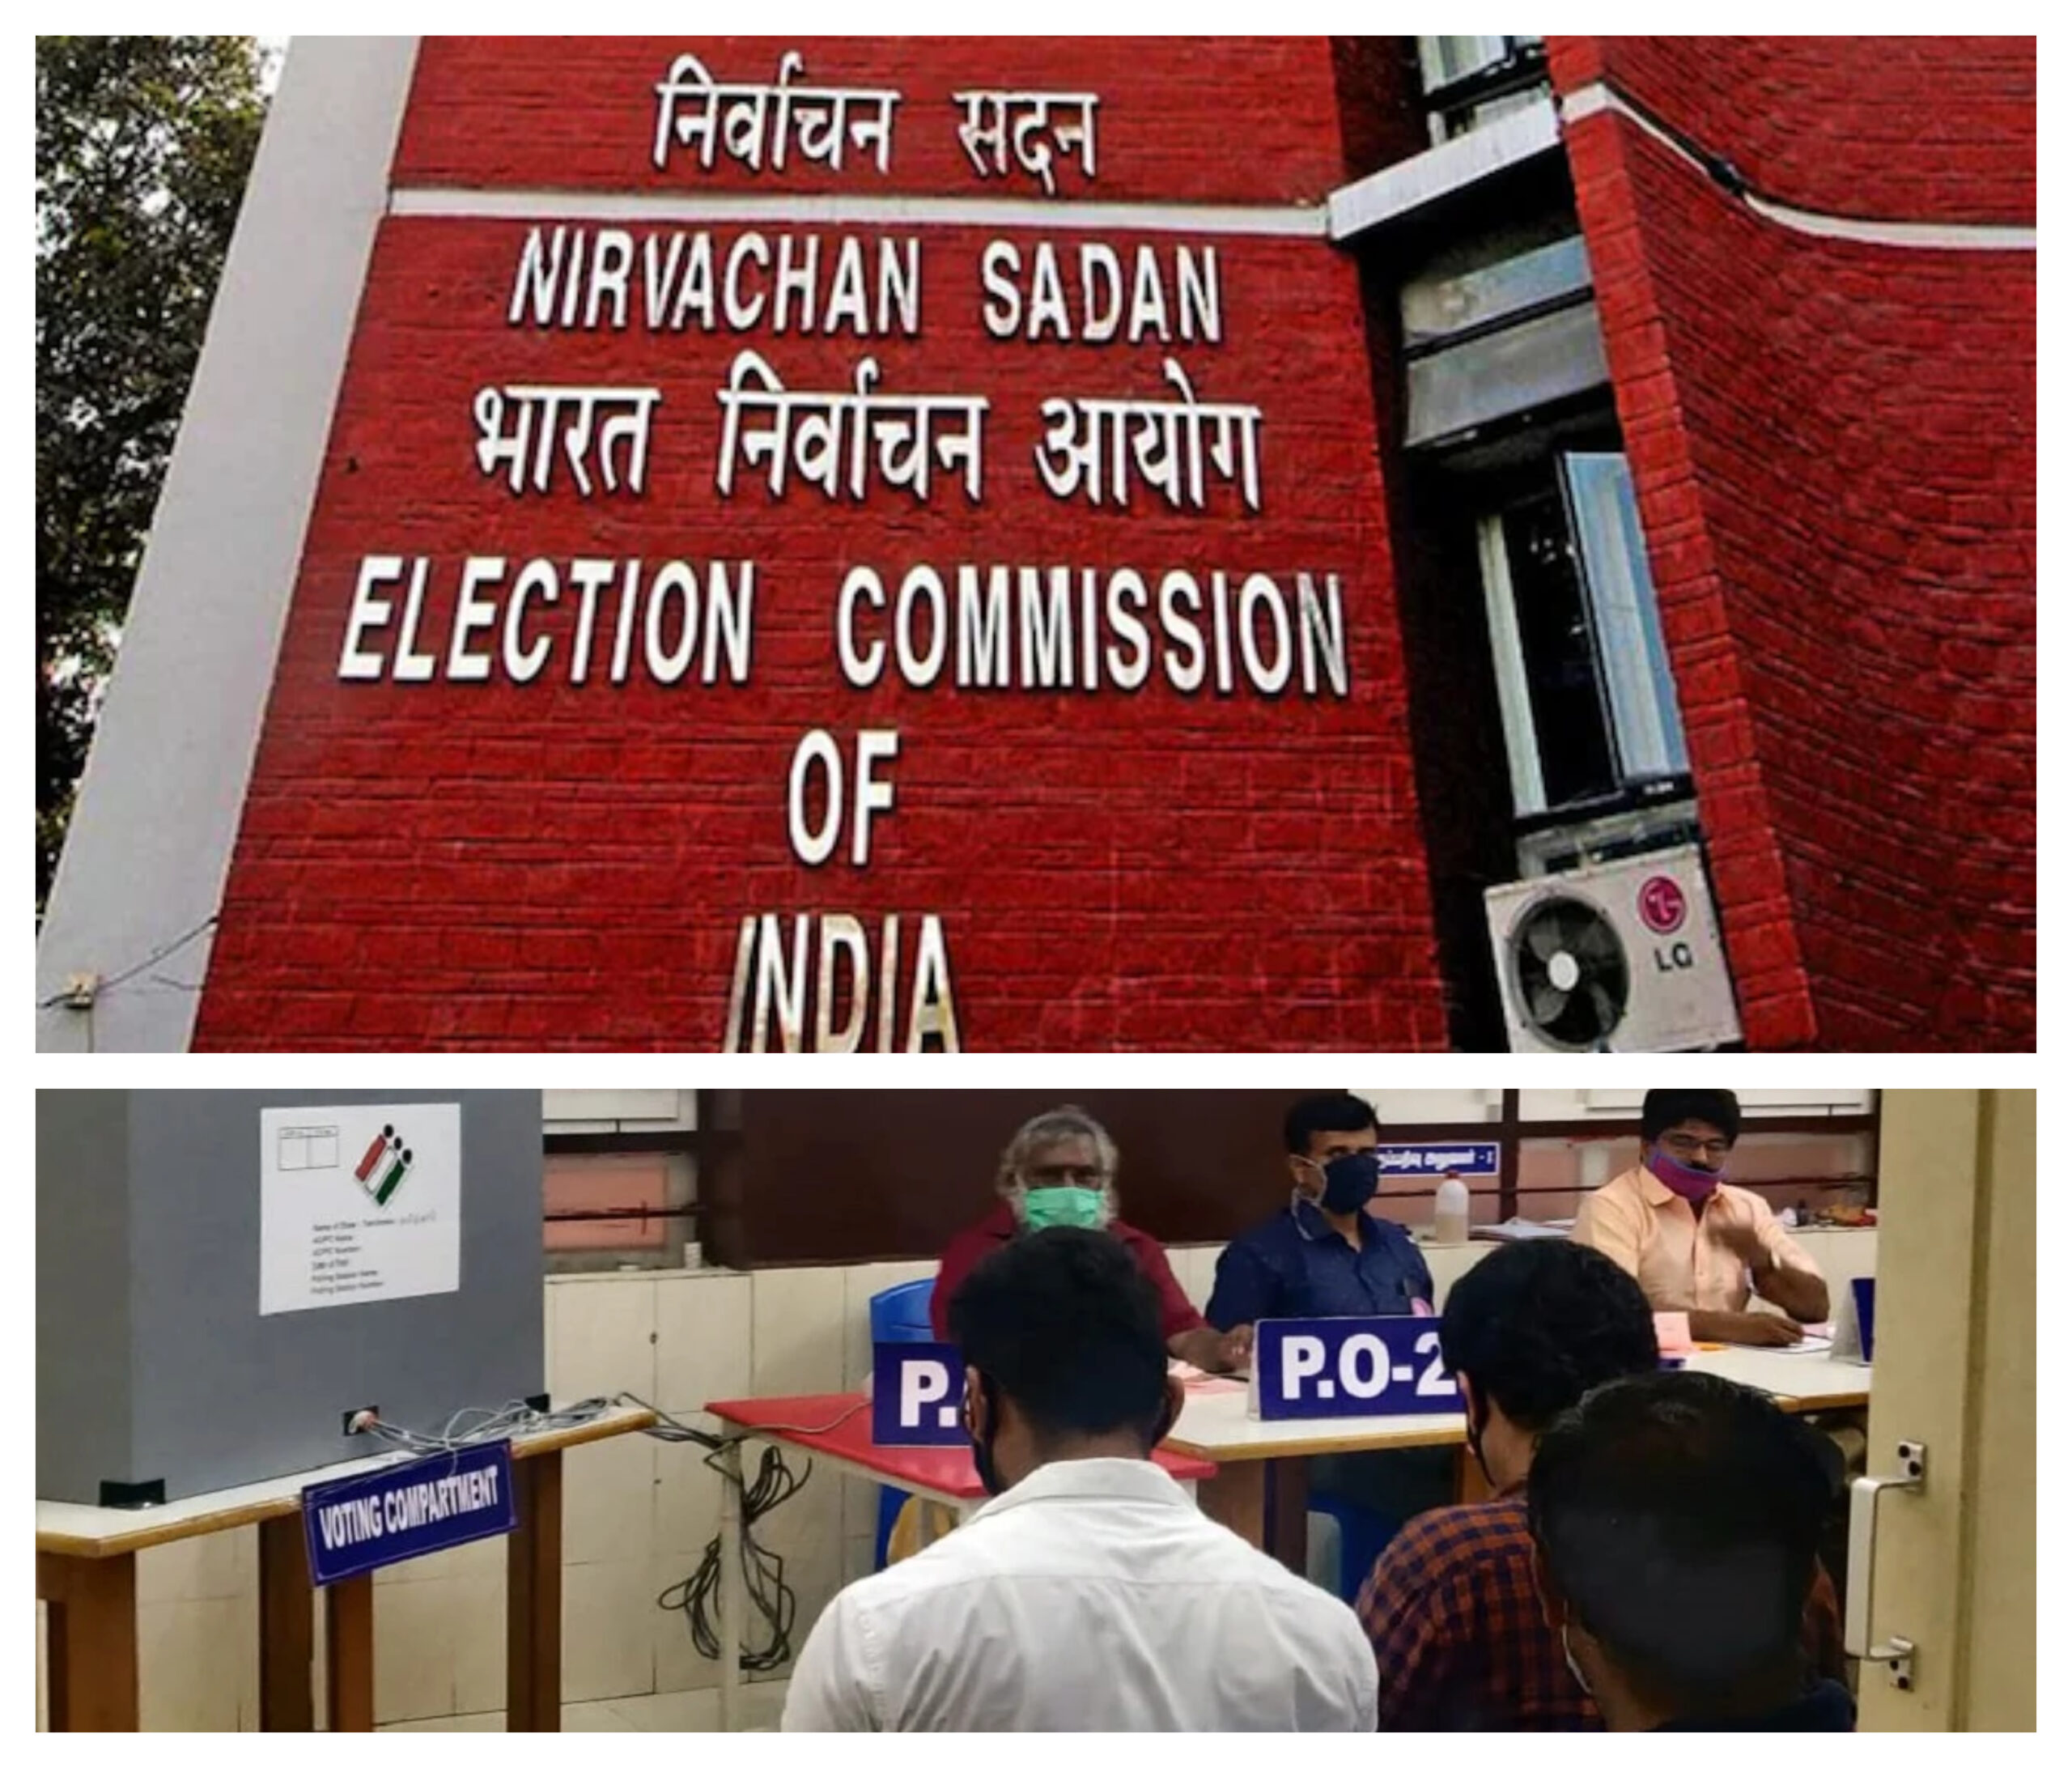 Arunachal Pradesh: Election Commission orders re-polling at 8 polling stations